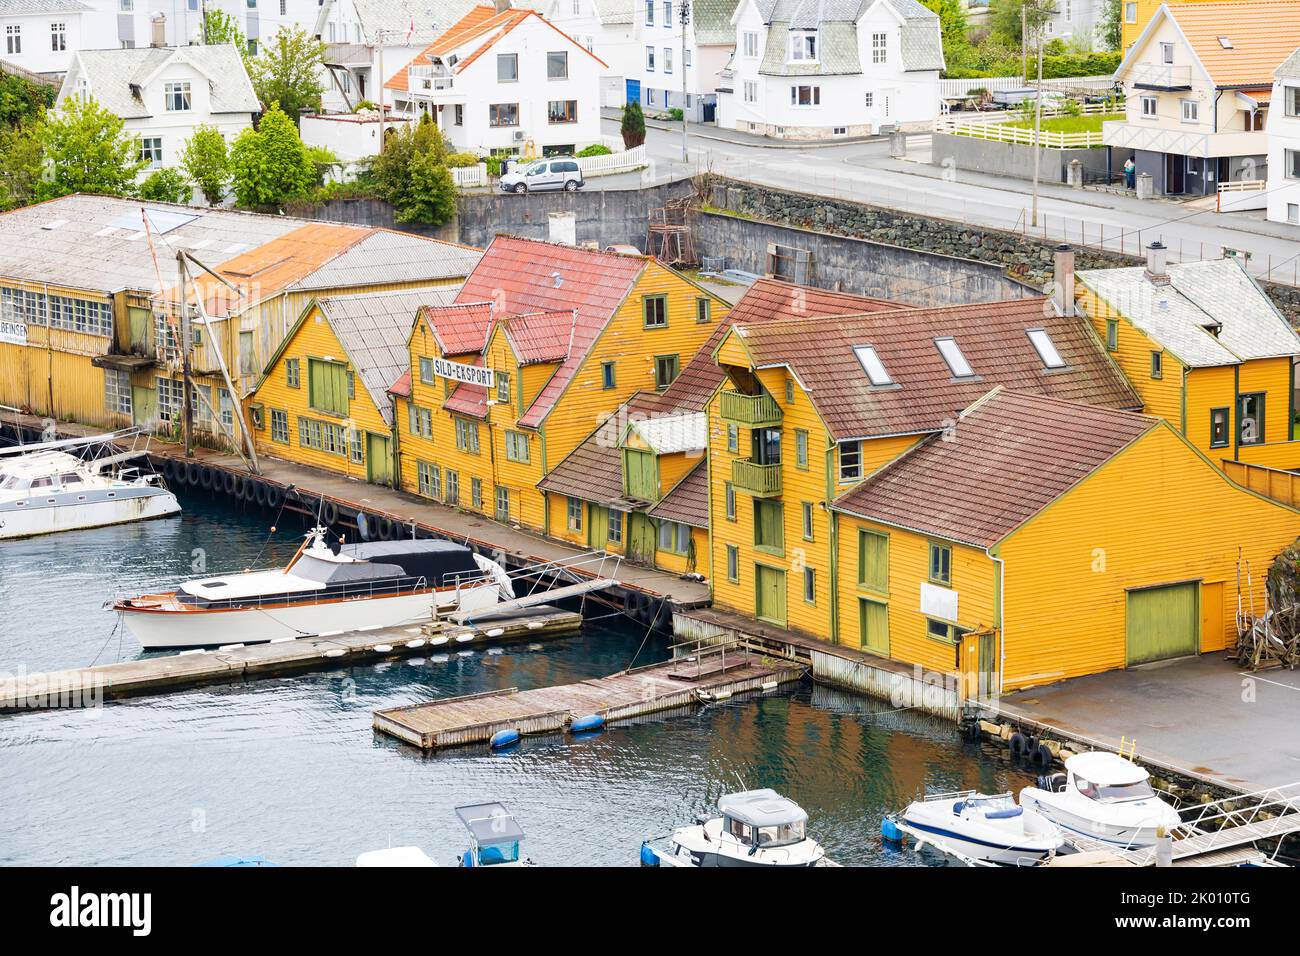 Colourful, traditional wooden warehouses herring canning buildings, now apartments. Sundgata, Haugesund, Norway Stock Photo